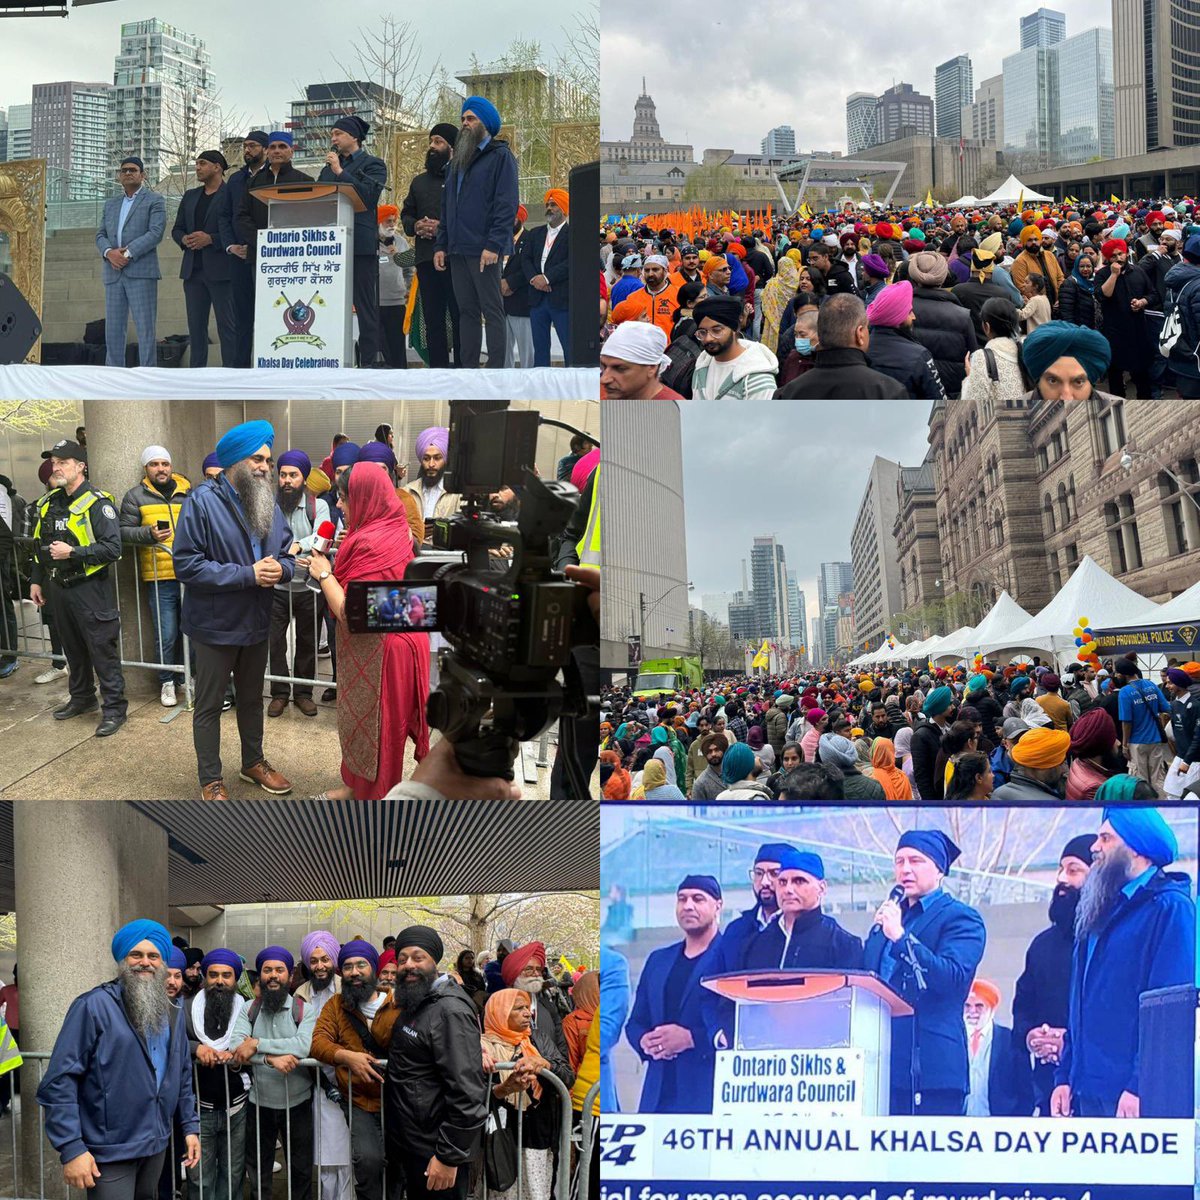 46th annual Khalsa Day Parade in Toronto with our Common Sense Conservative Leader and team @PierrePoilievre @jasrajshallan @ParmGill @ArpanKhanna @IshaqCPC @RealRonChhinzer